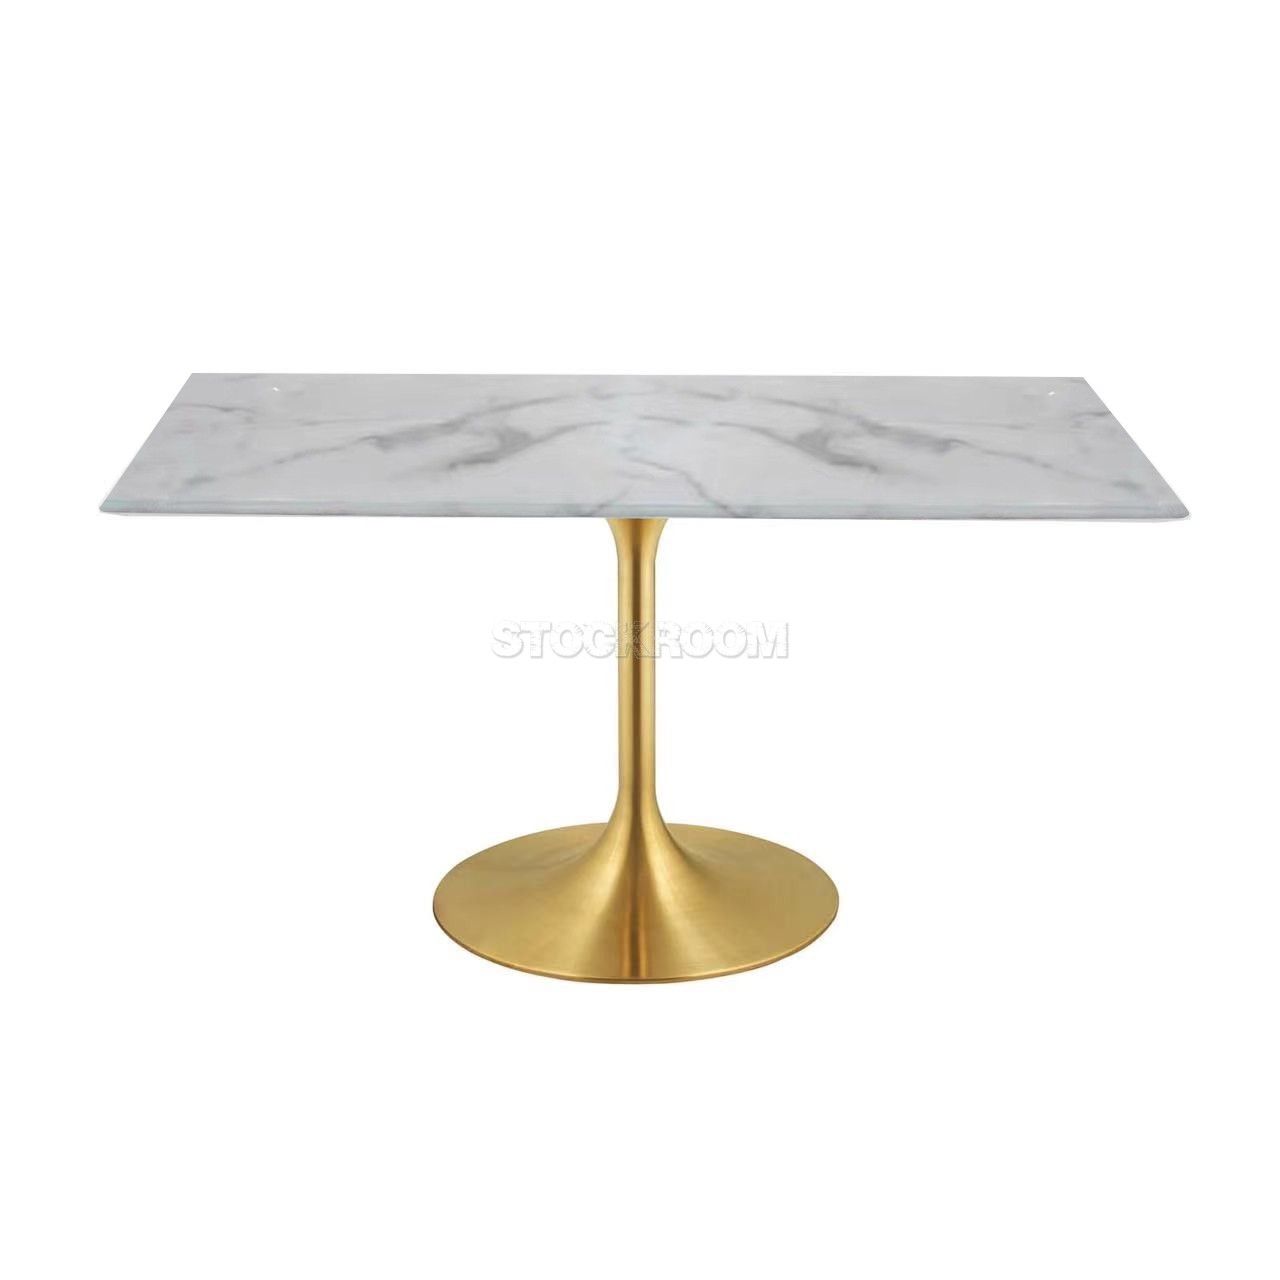 Eero Saarinen Tulip Style Square Dining Table with Brass Base - Marble